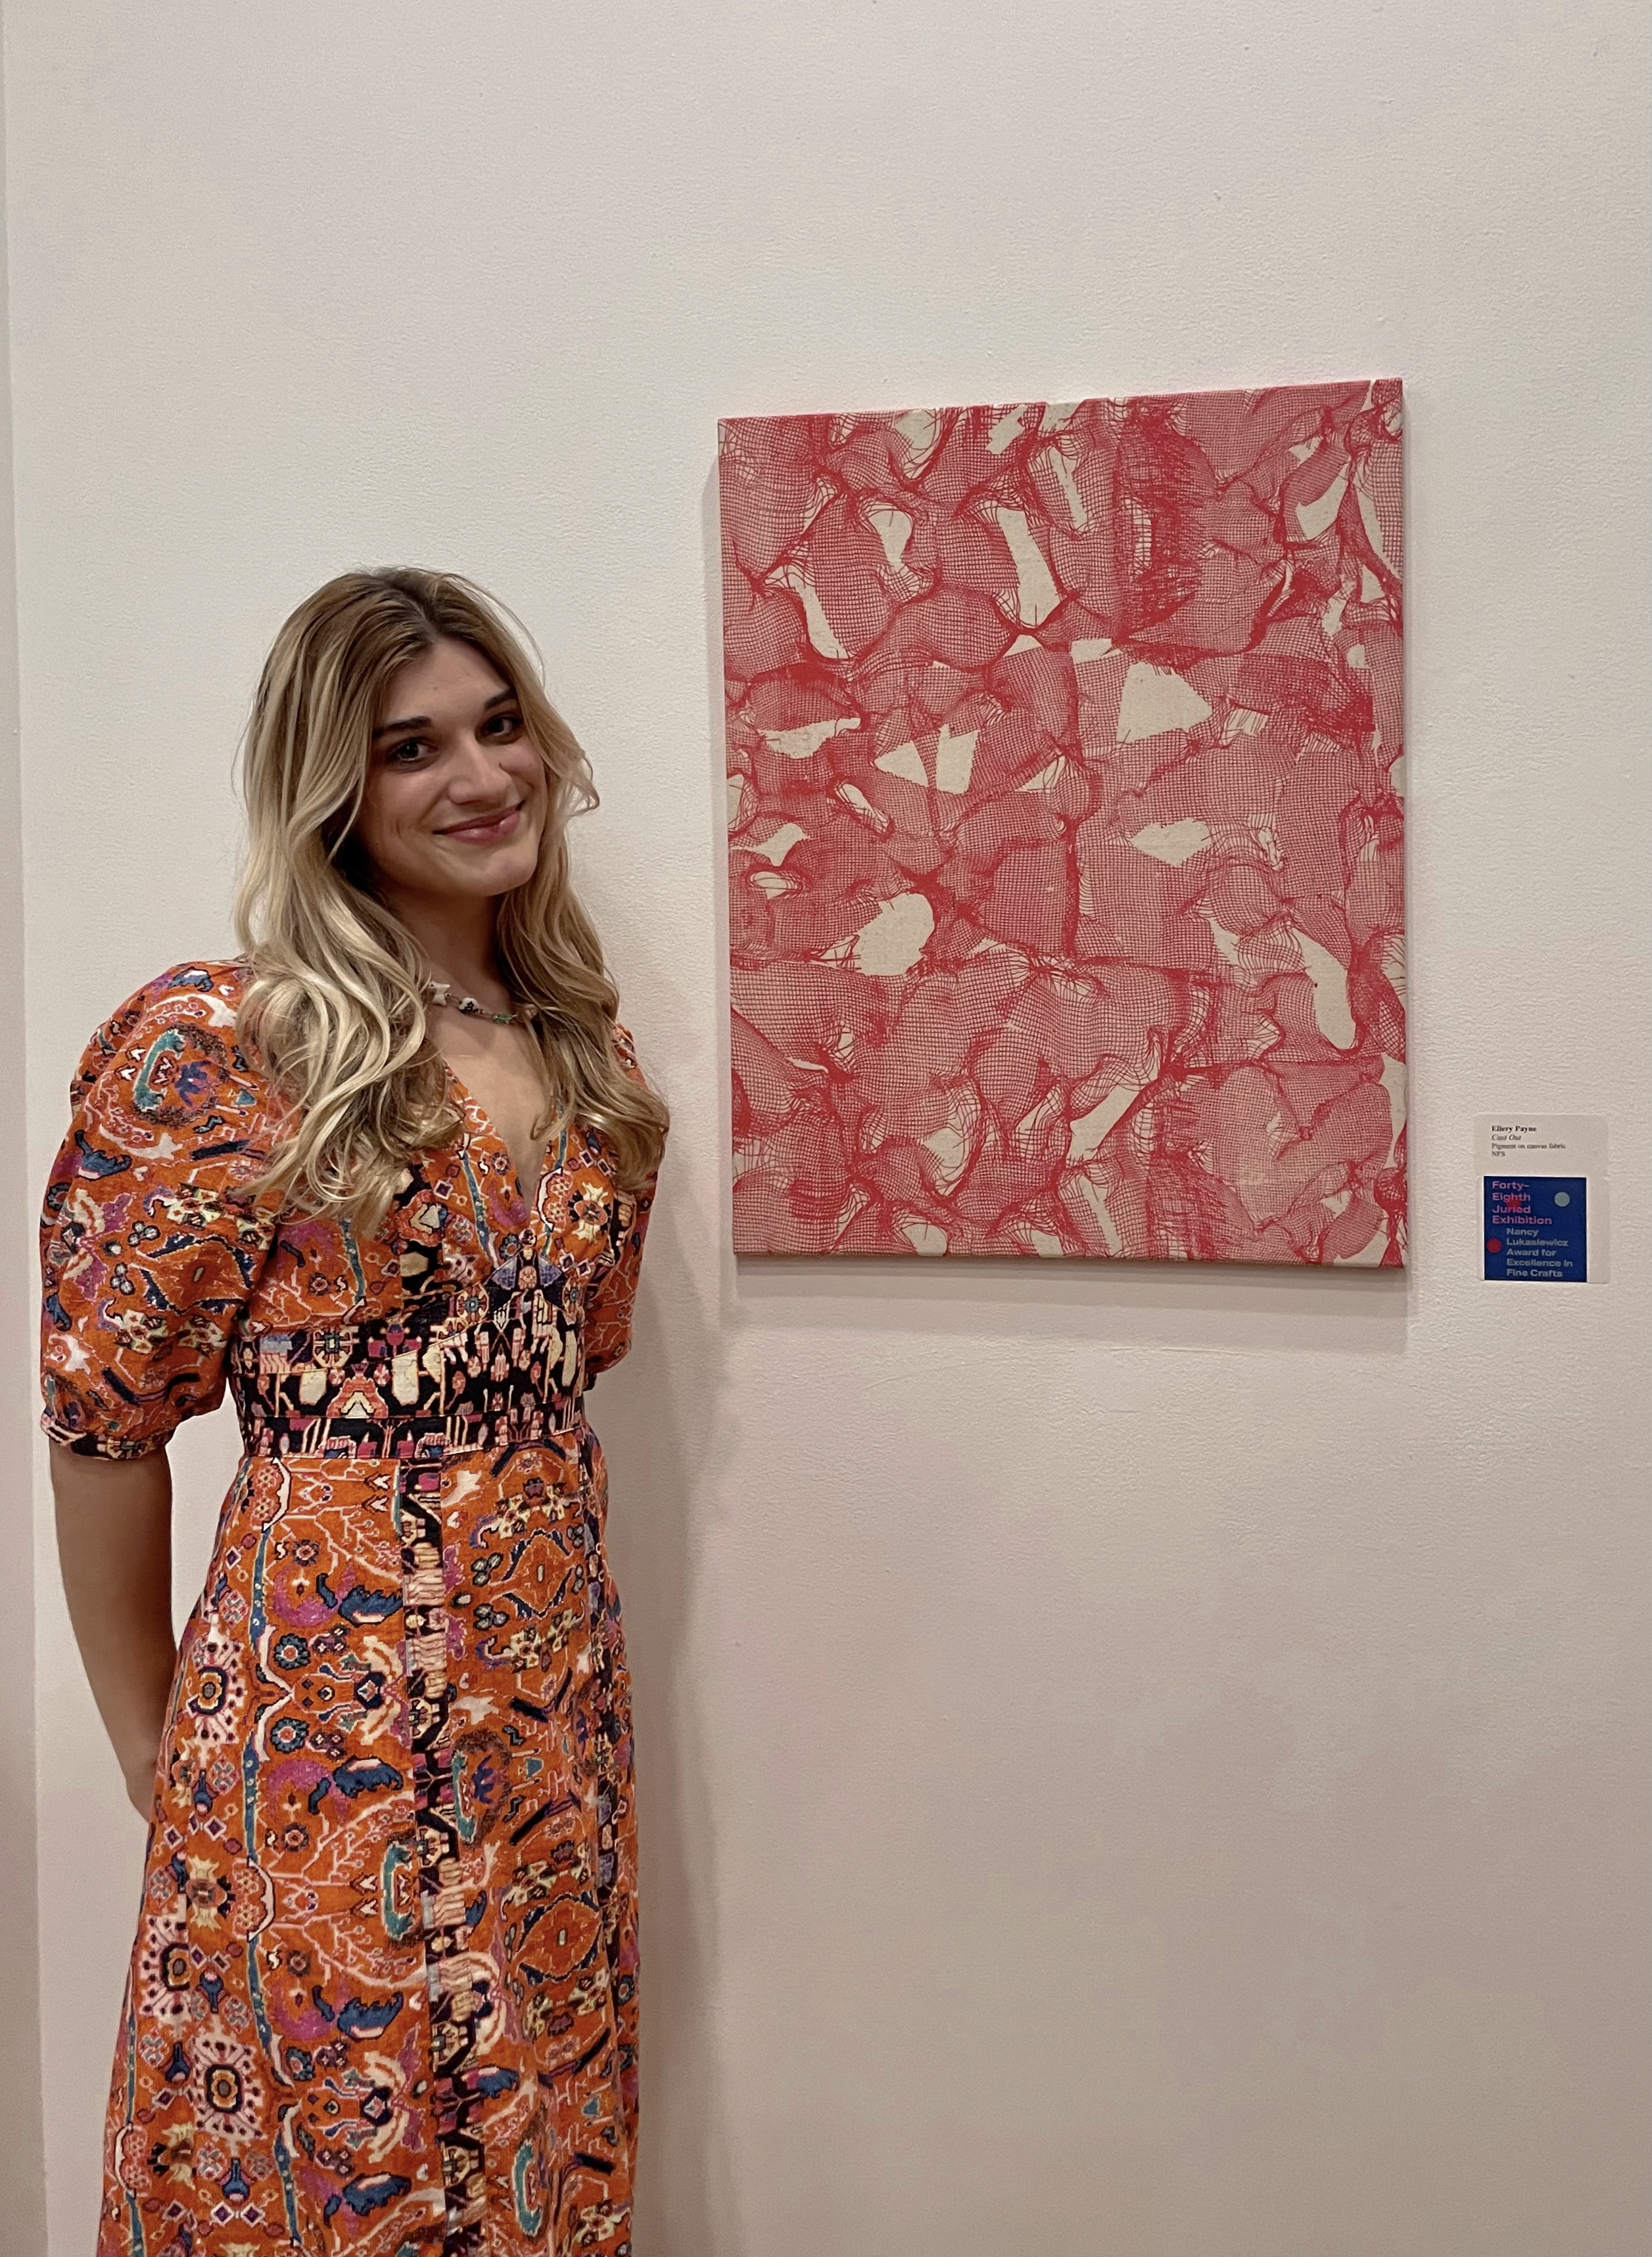 Ellery Payne with Cast Out (2022) at Lyndon House Art Center 48th Juried Exhibition Opening, March 2, 2023. Courtesy of Ellery Payne.